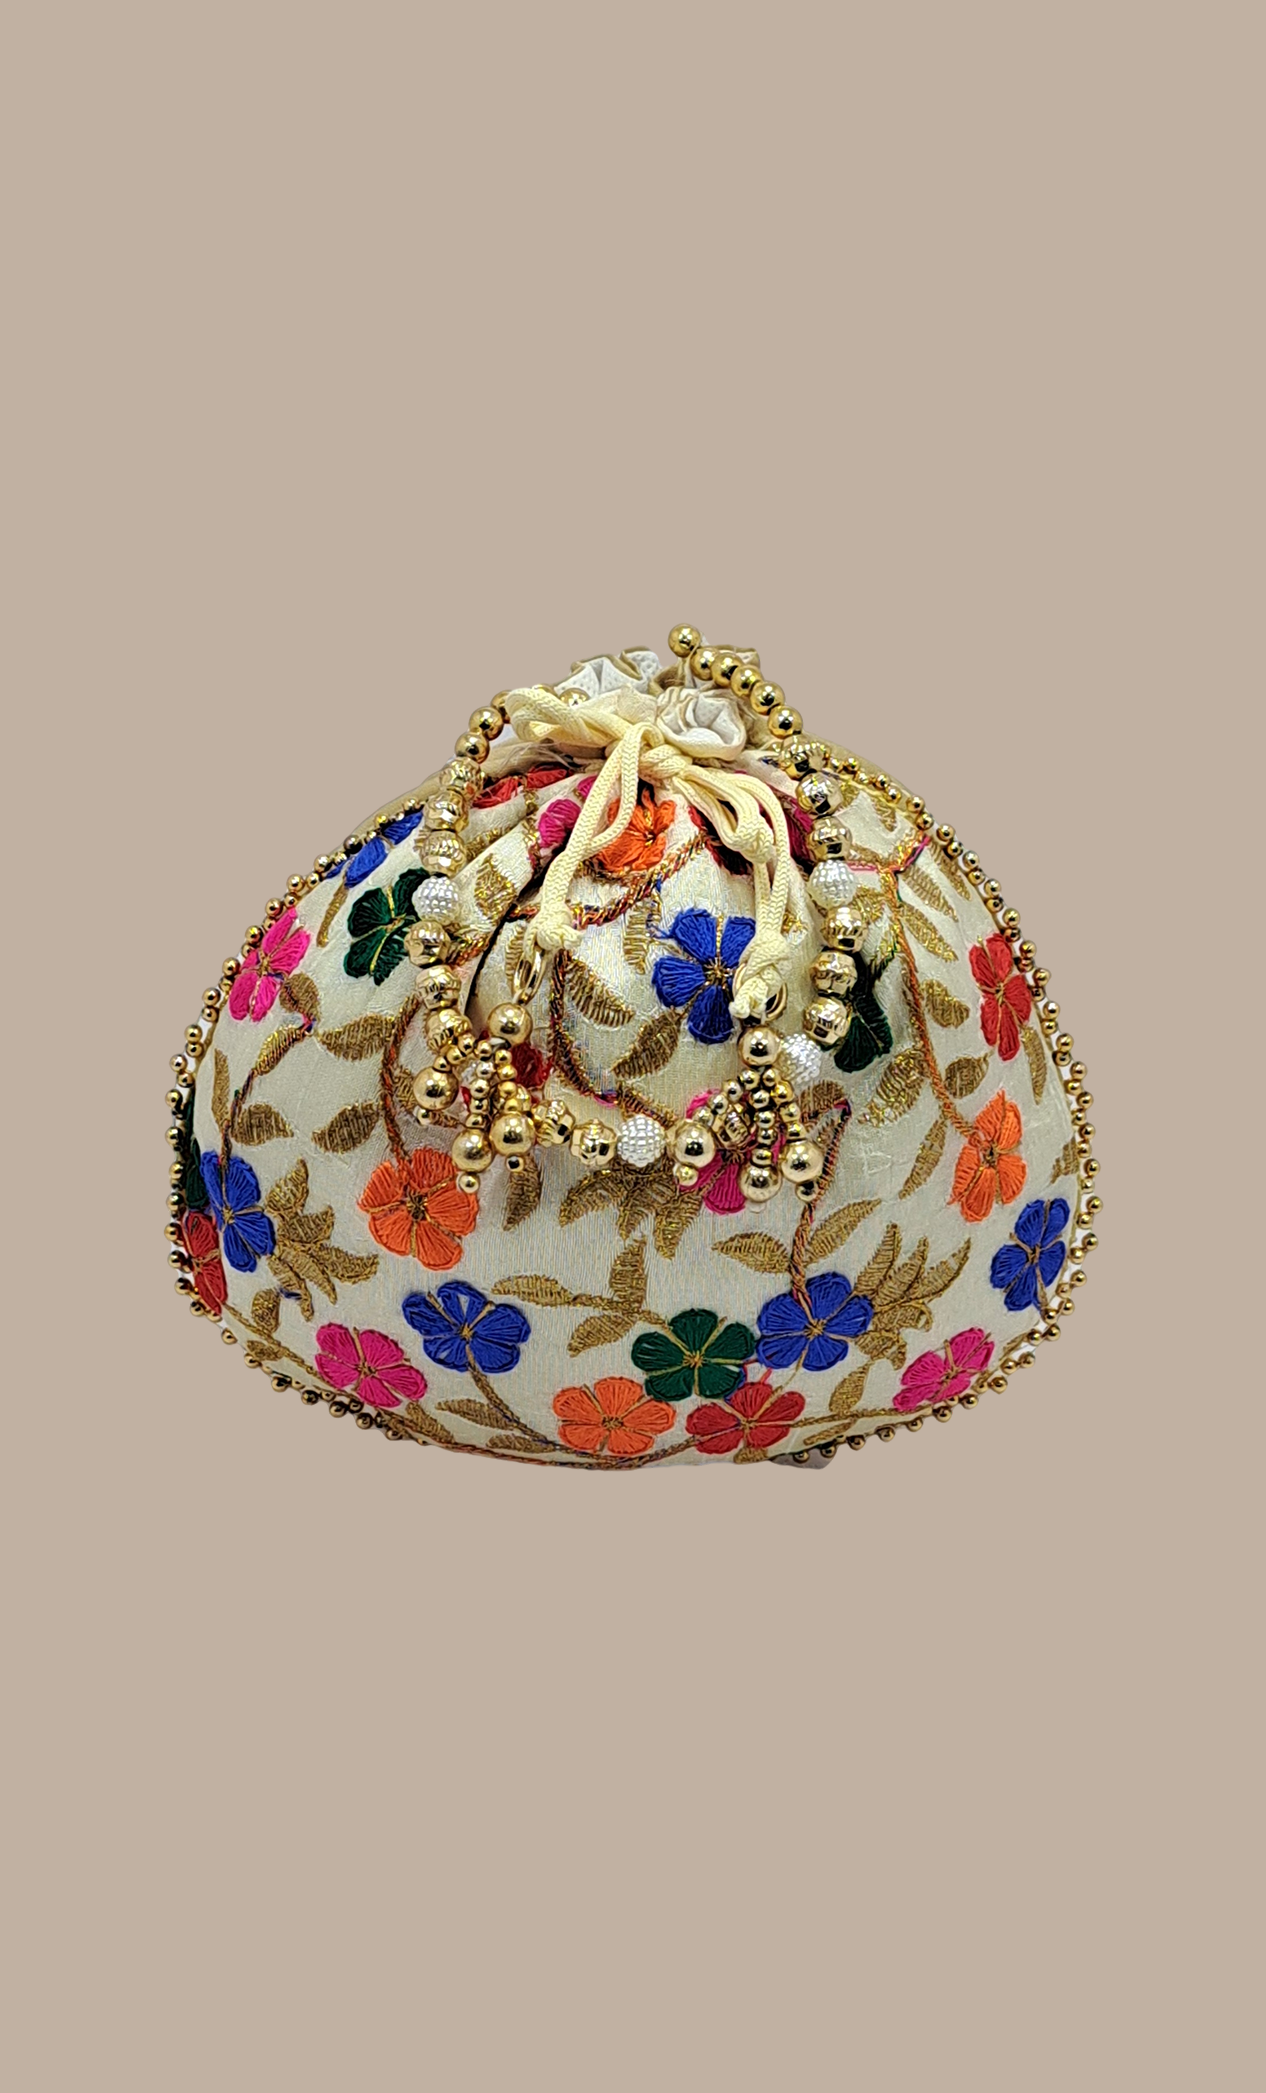 Floral Embroidered Pouch Bag